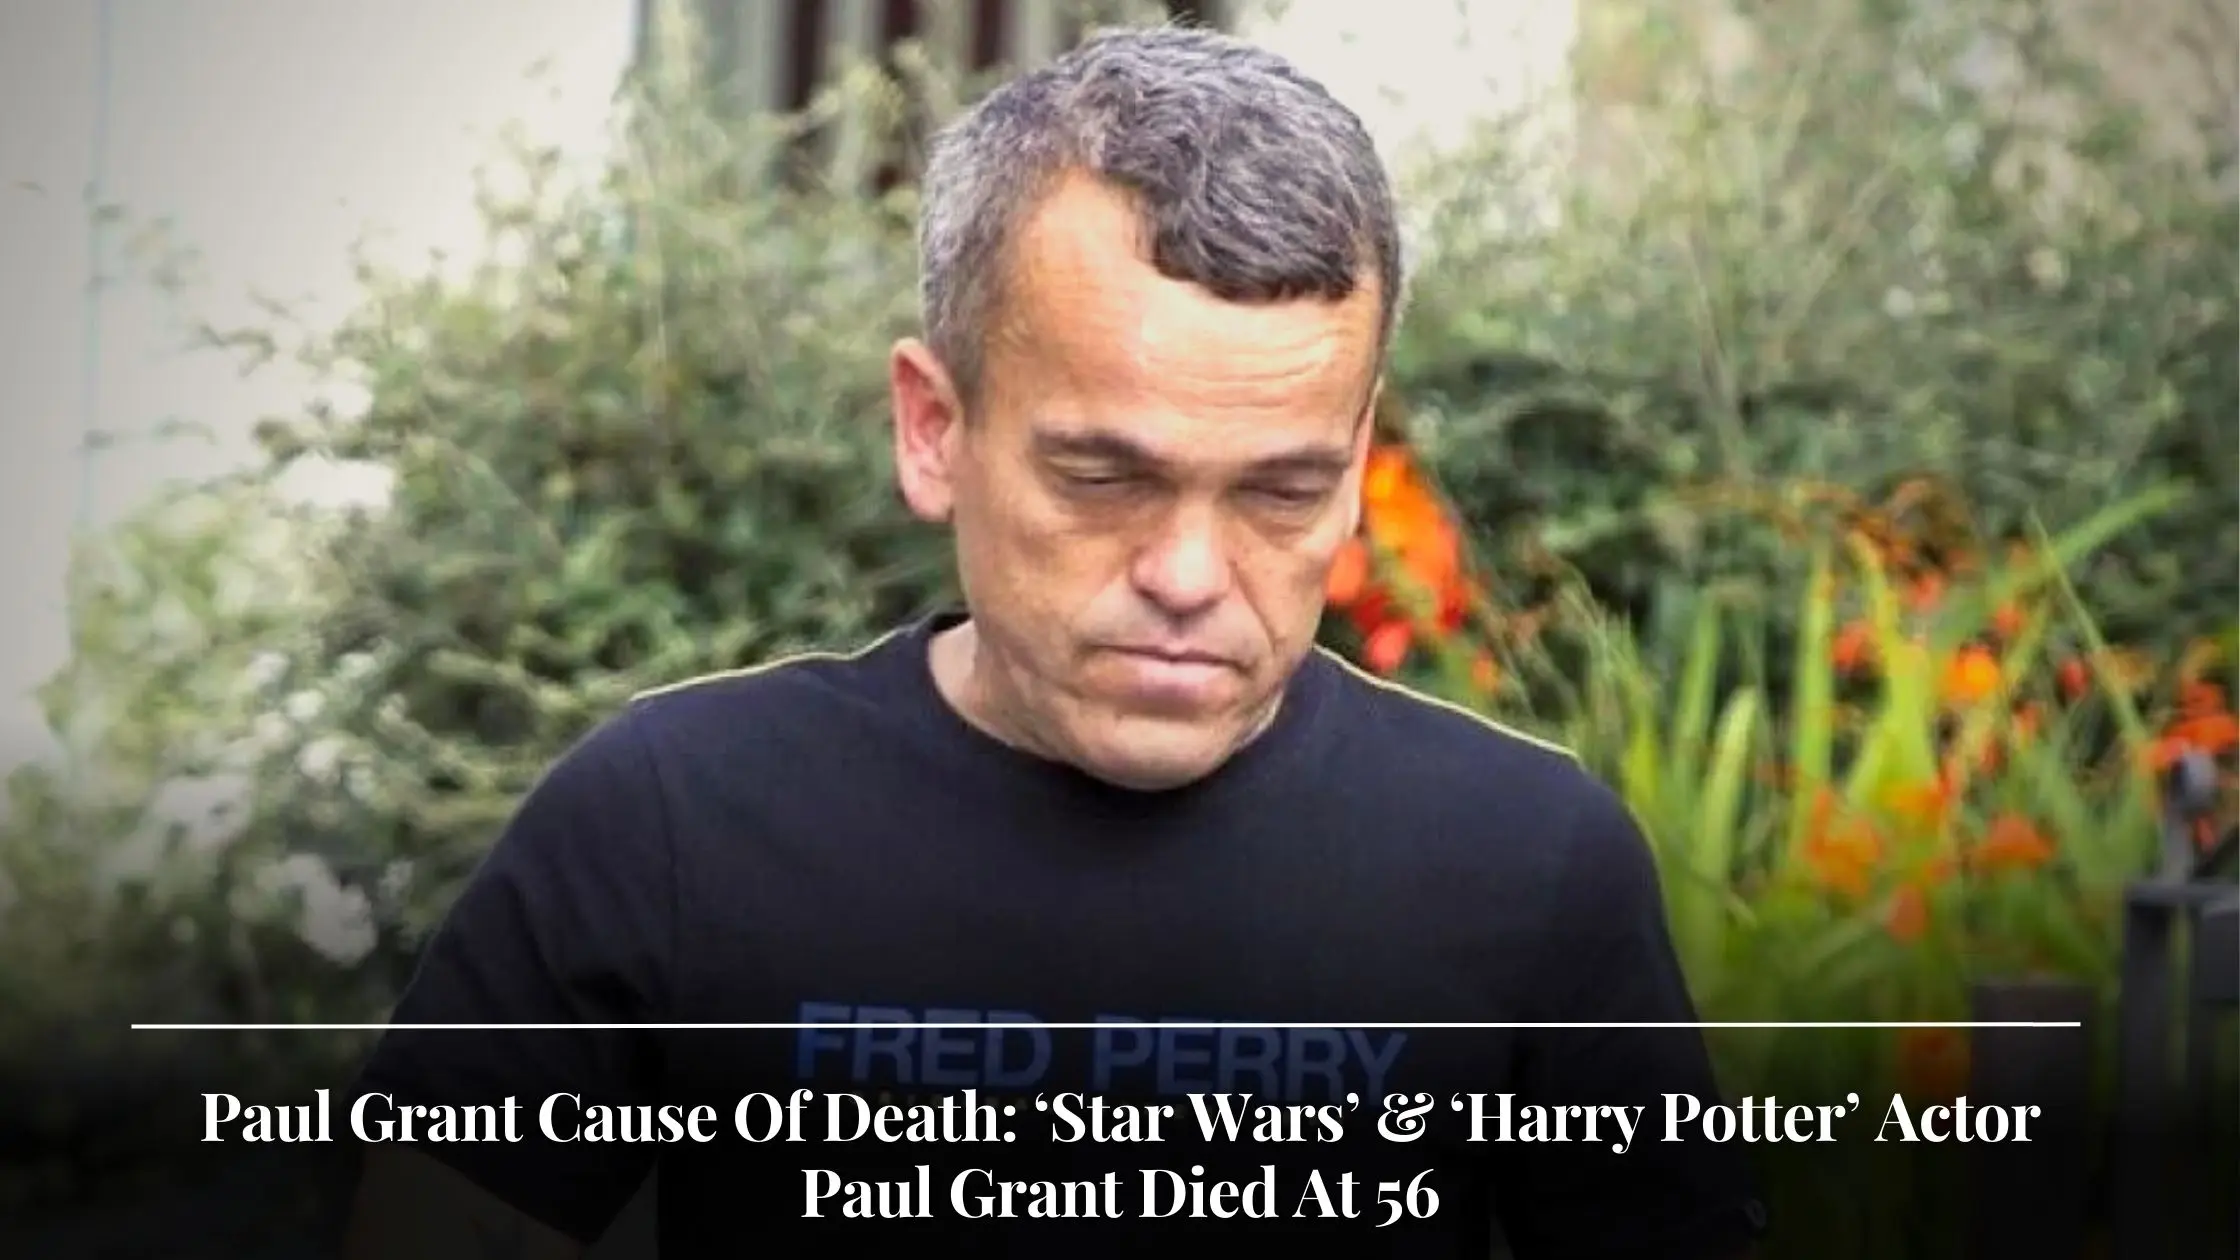 Paul Grant Cause Of Death ‘Star Wars’ & ‘Harry Potter’ Actor Paul Grant Died At 56